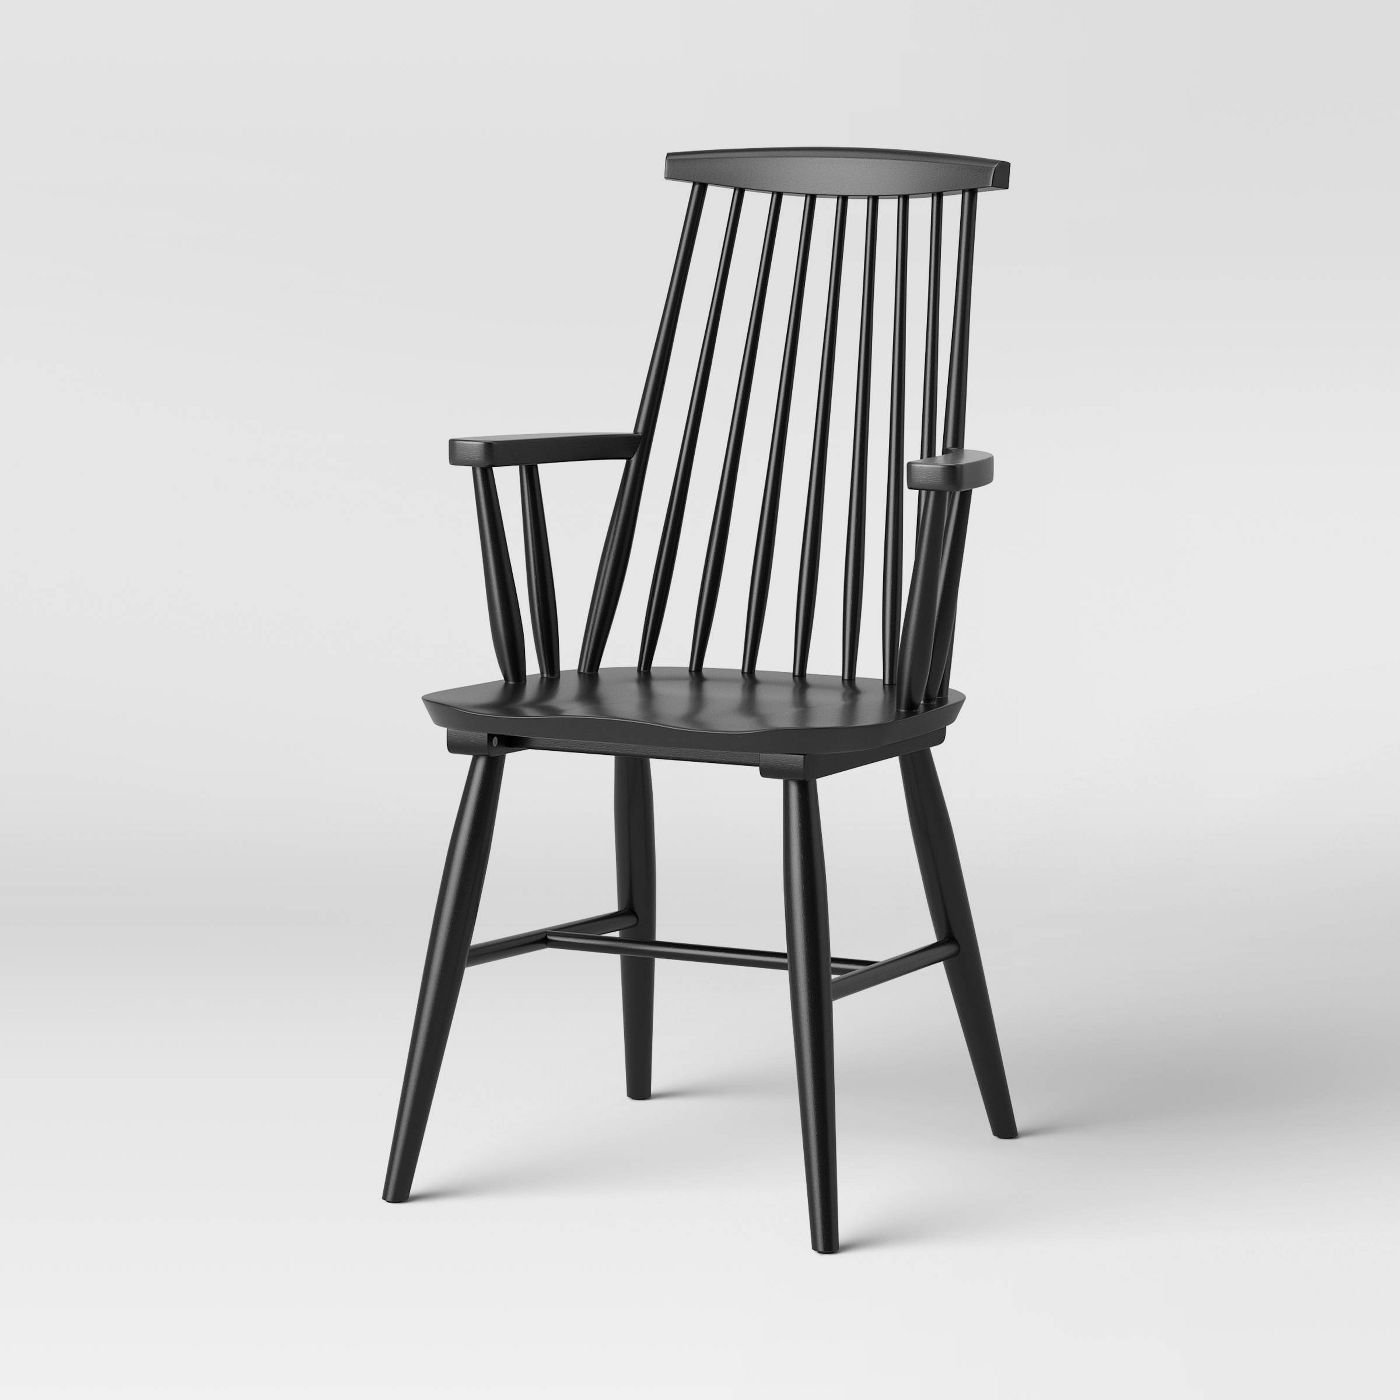 Harwich Wood Arm Dining Chair - Threshold™ | Target